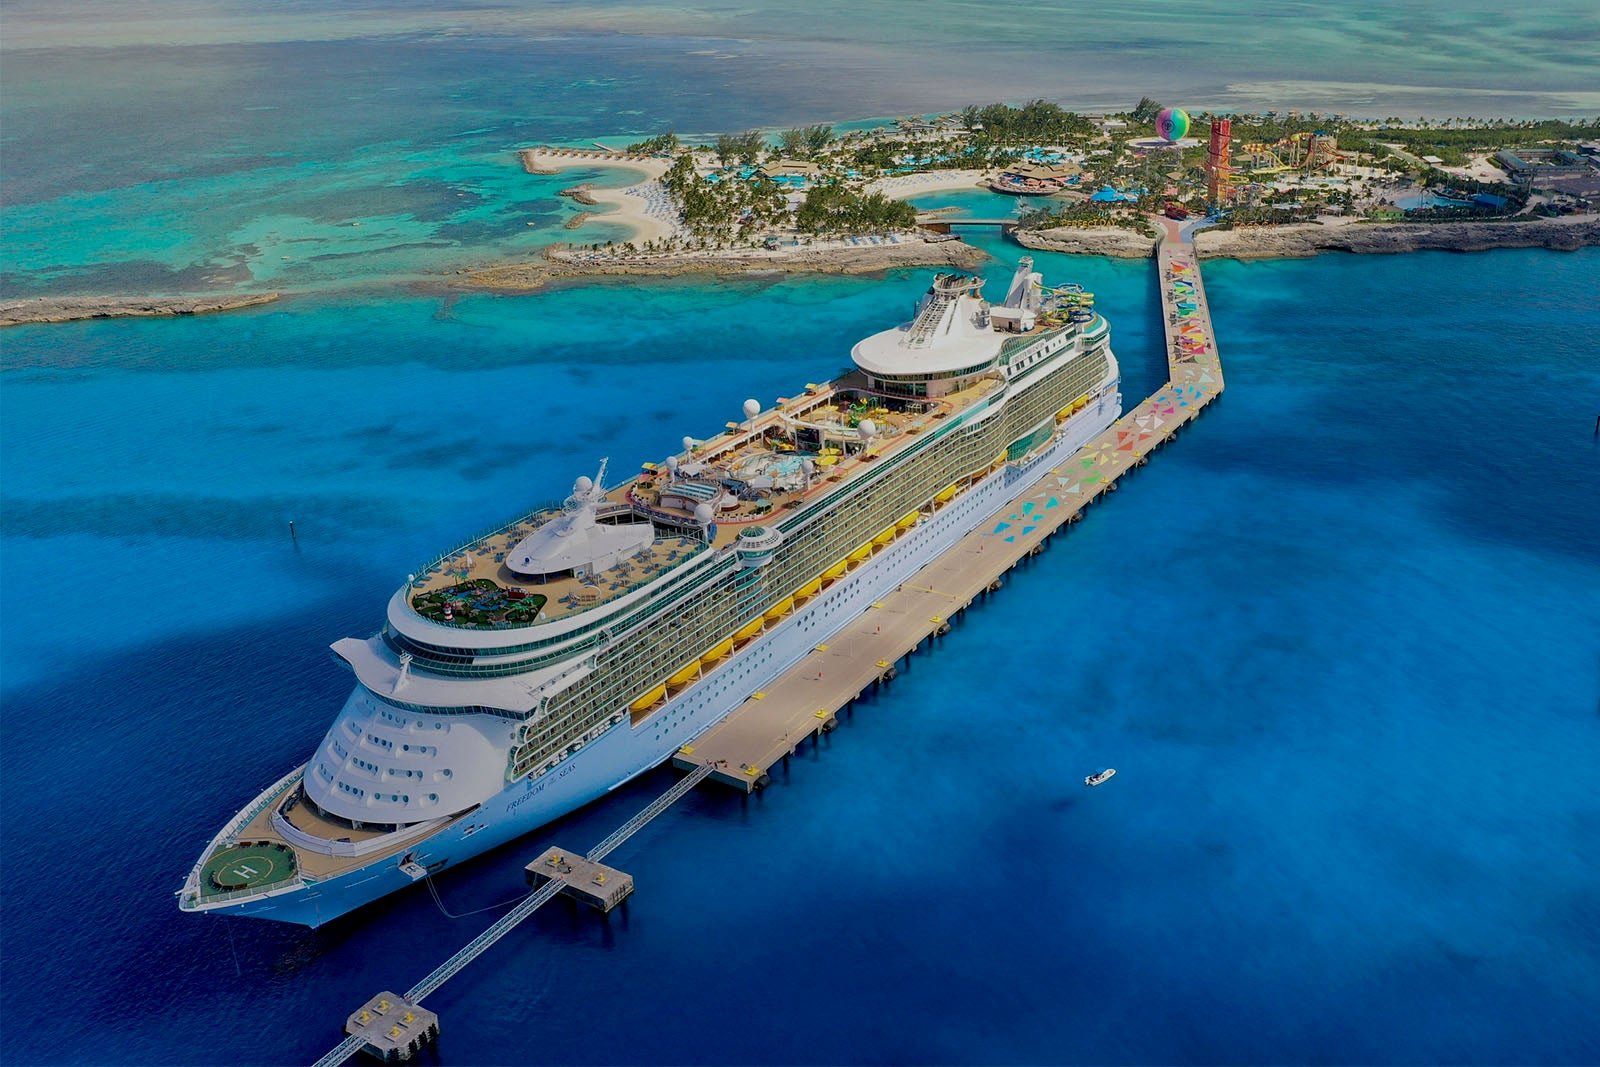 Deal watch: Cruise giant Royal Caribbean is selling fall cruises for under $100